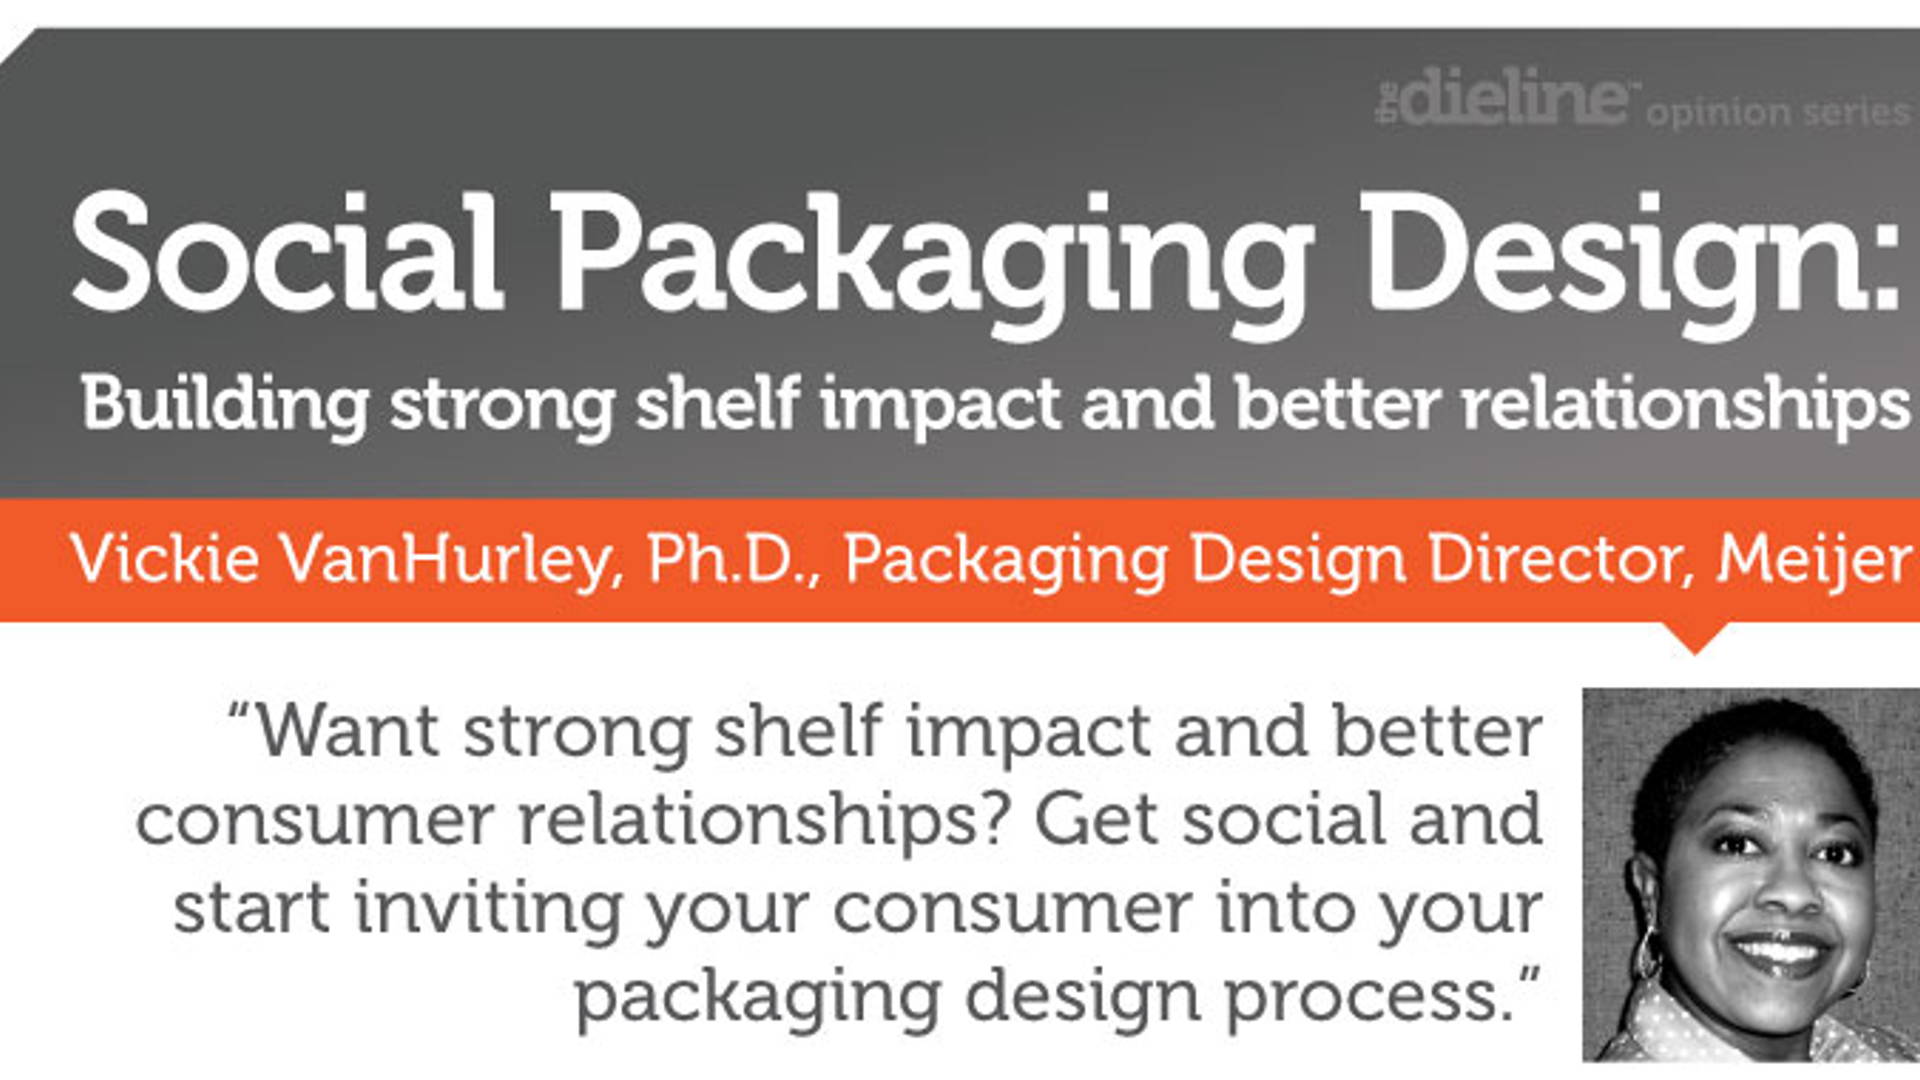 Featured image for Social Packaging Design: Building Strong Shelf Impact and Better Relationships